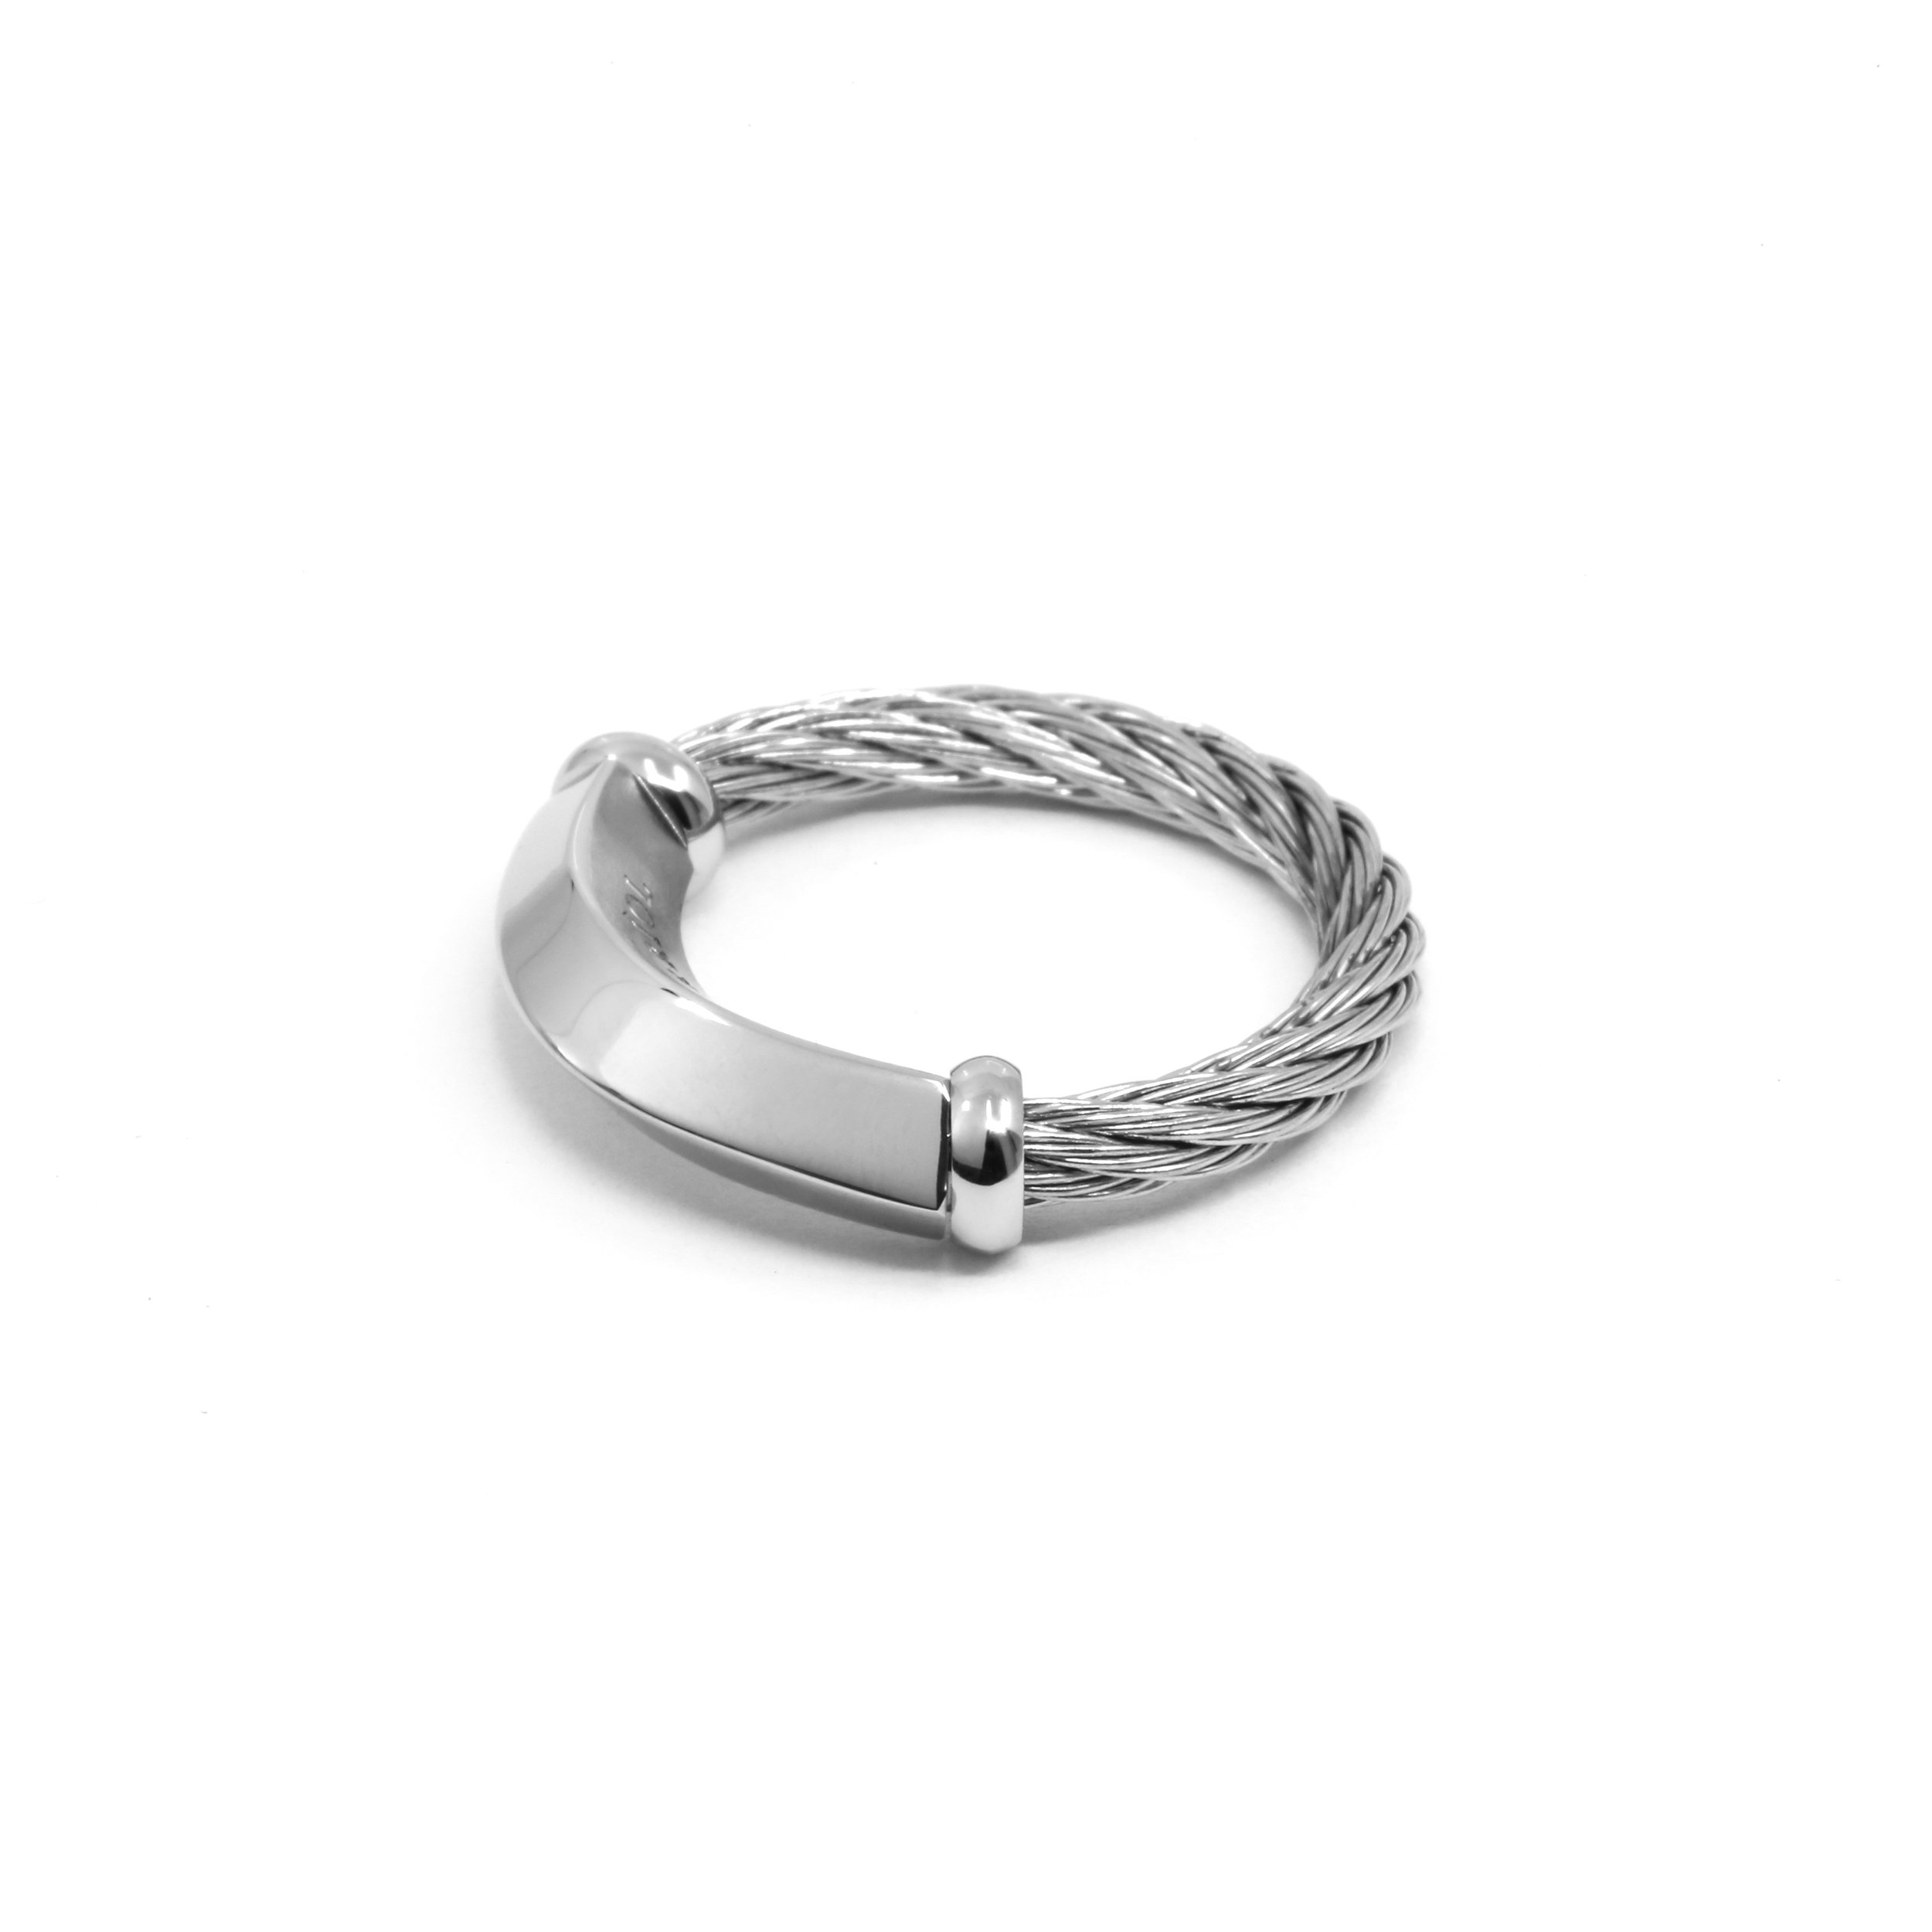 Better Half Ring - Stainless Steel Decor, Stainless Steel Cable.jpg